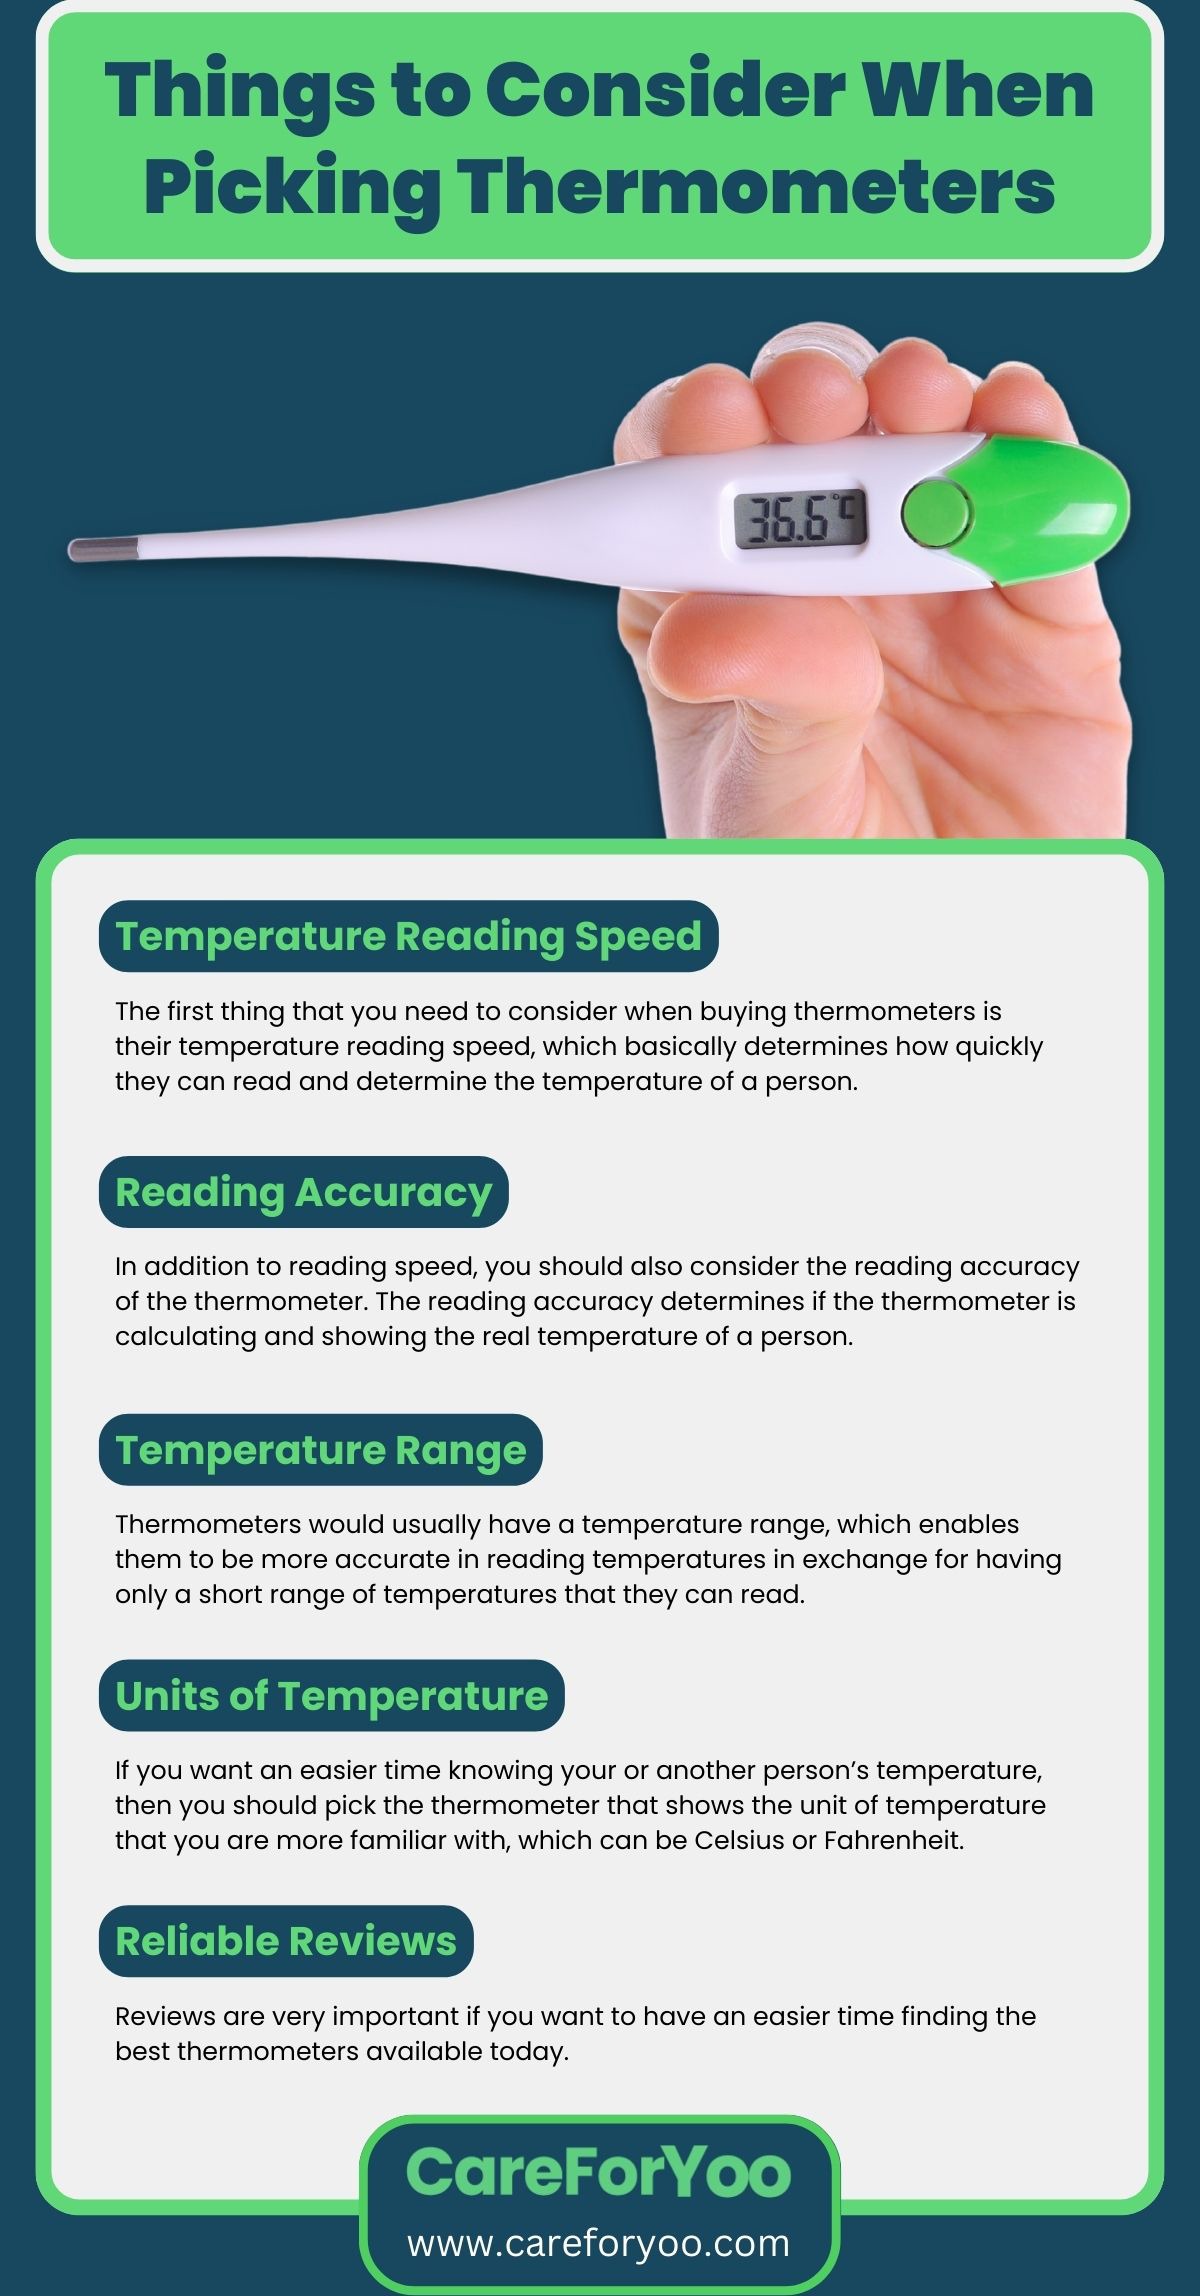 Things to Consider When Picking Thermometers